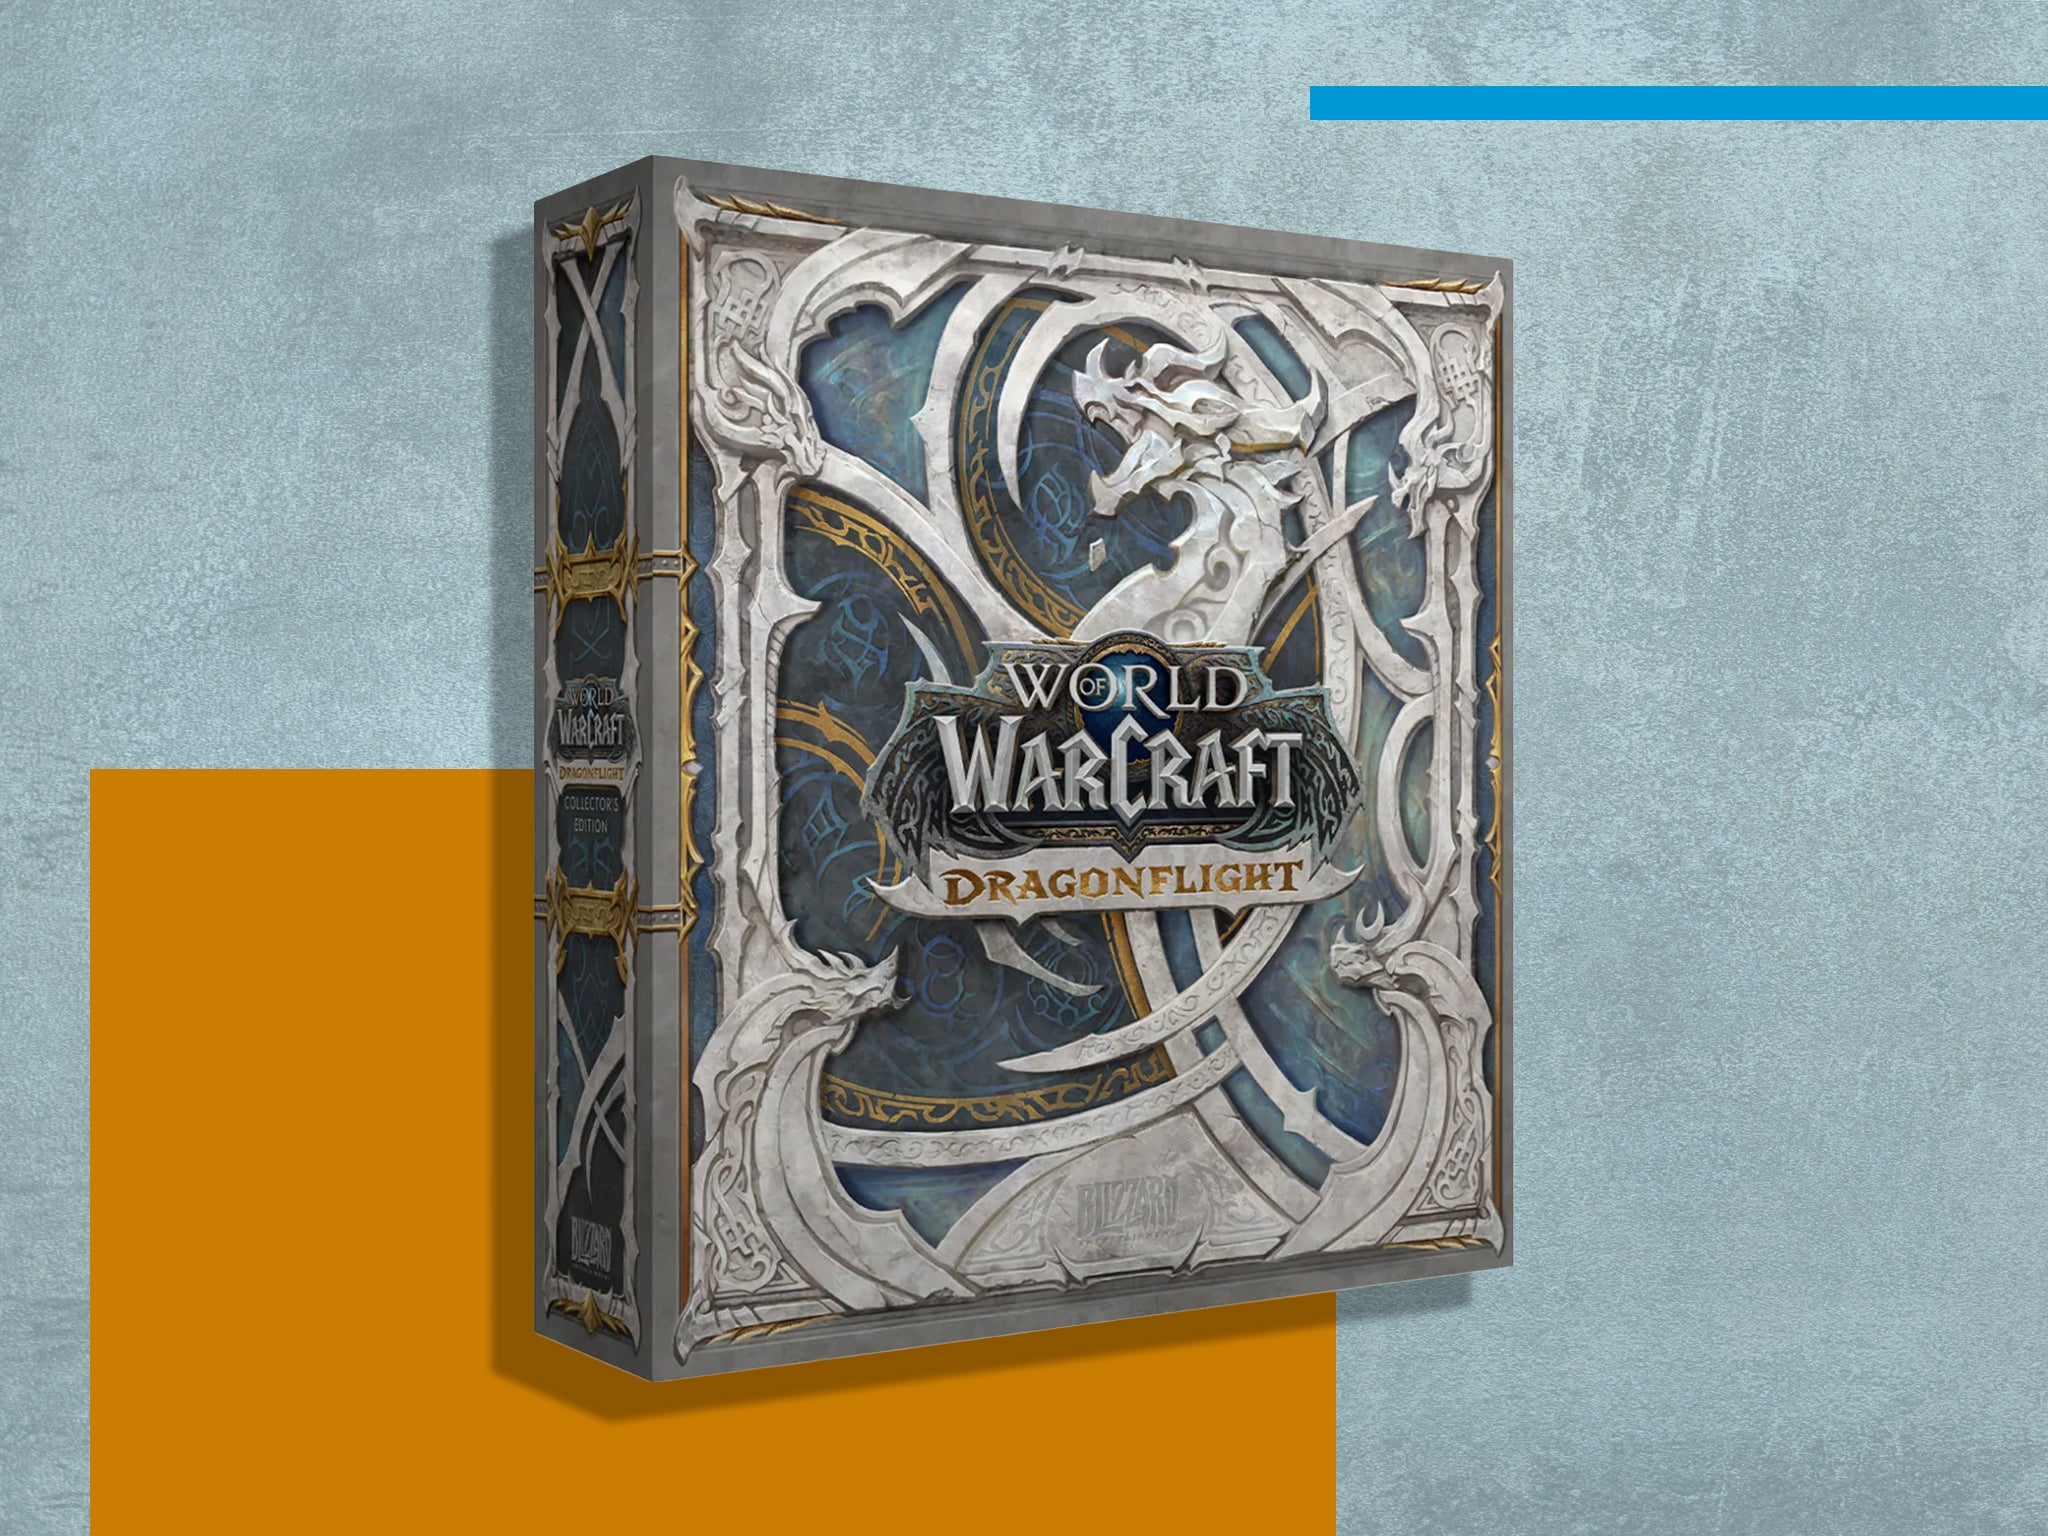 The special edition comes with lots of exclusive WoW goodies